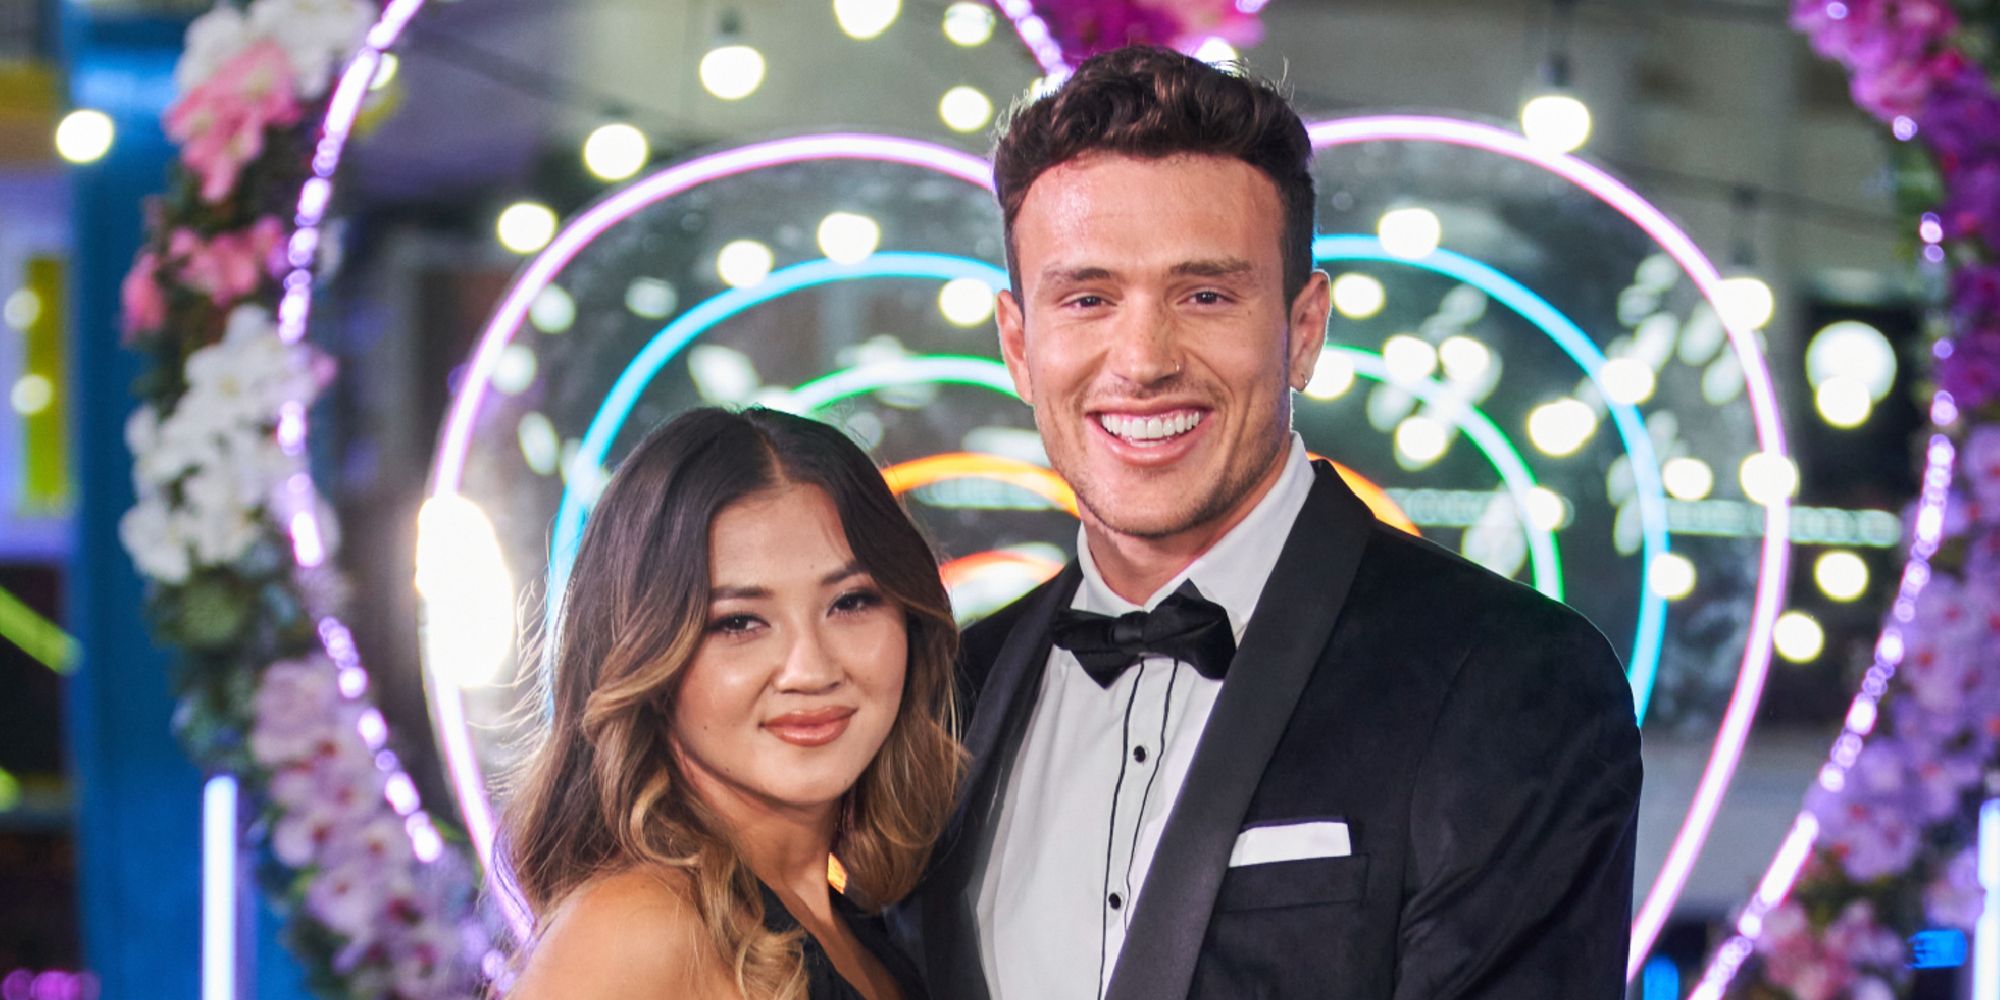 Love Island USA Will Kyra Leslie & Bennett Have Double Date In LA